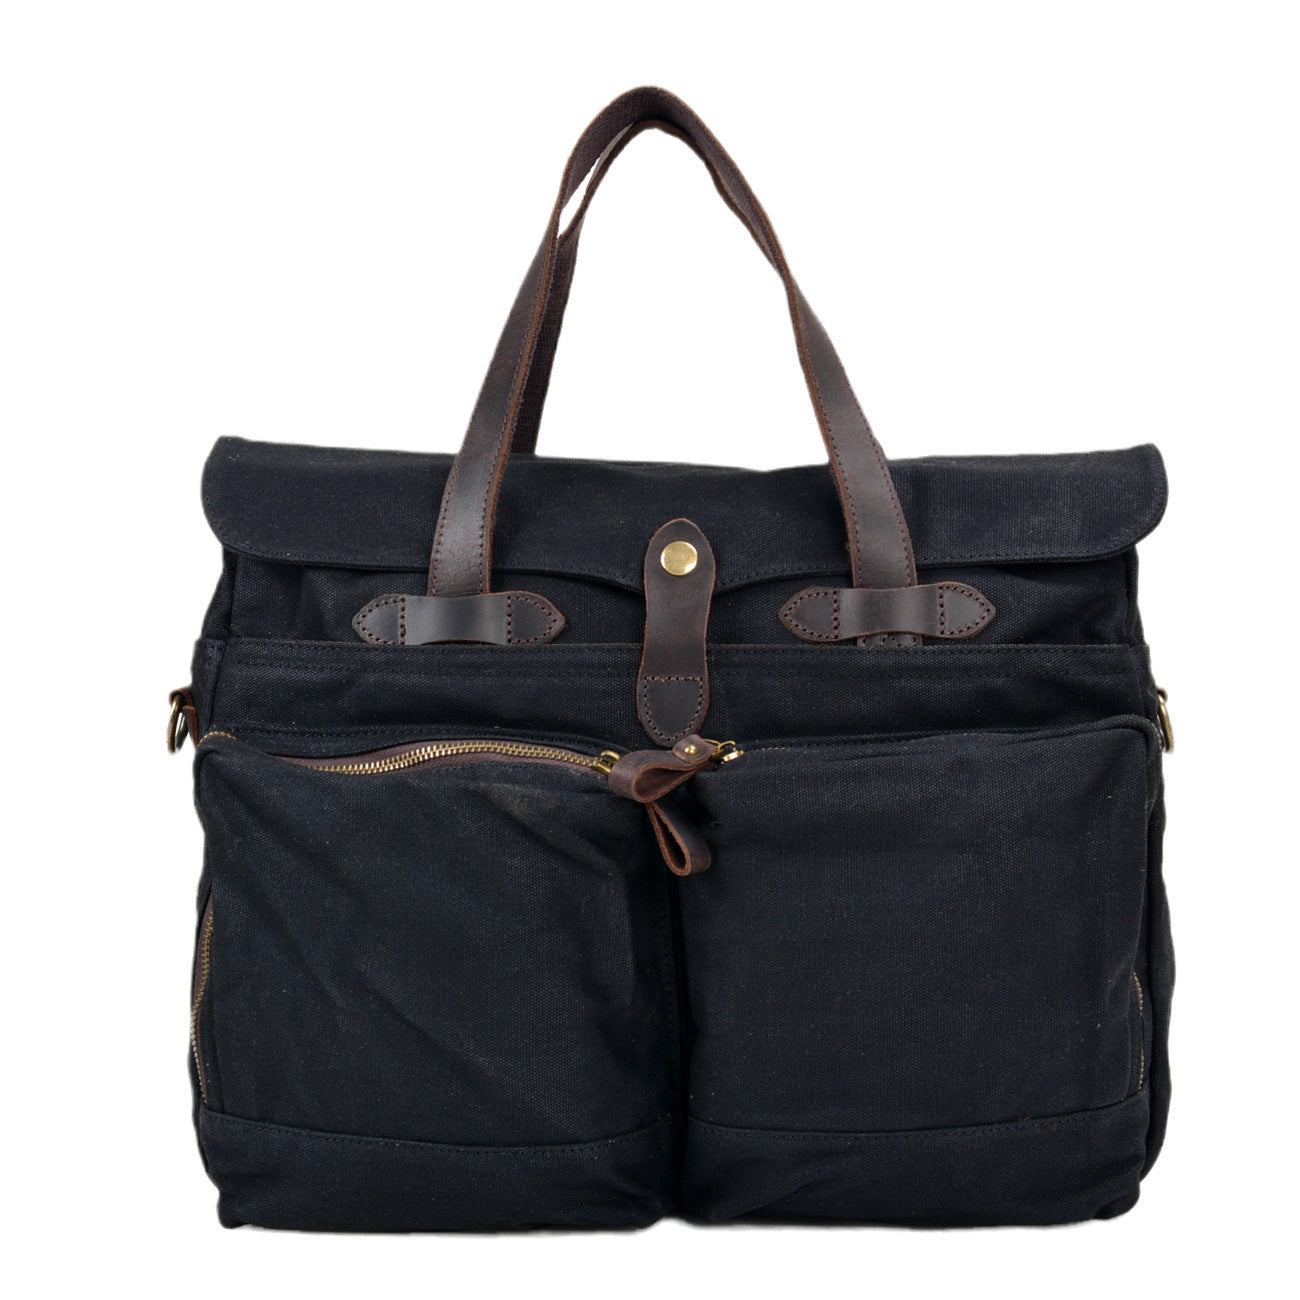 Waxed Canvas Briefcase for 15.6 inch Laptop - Woosir